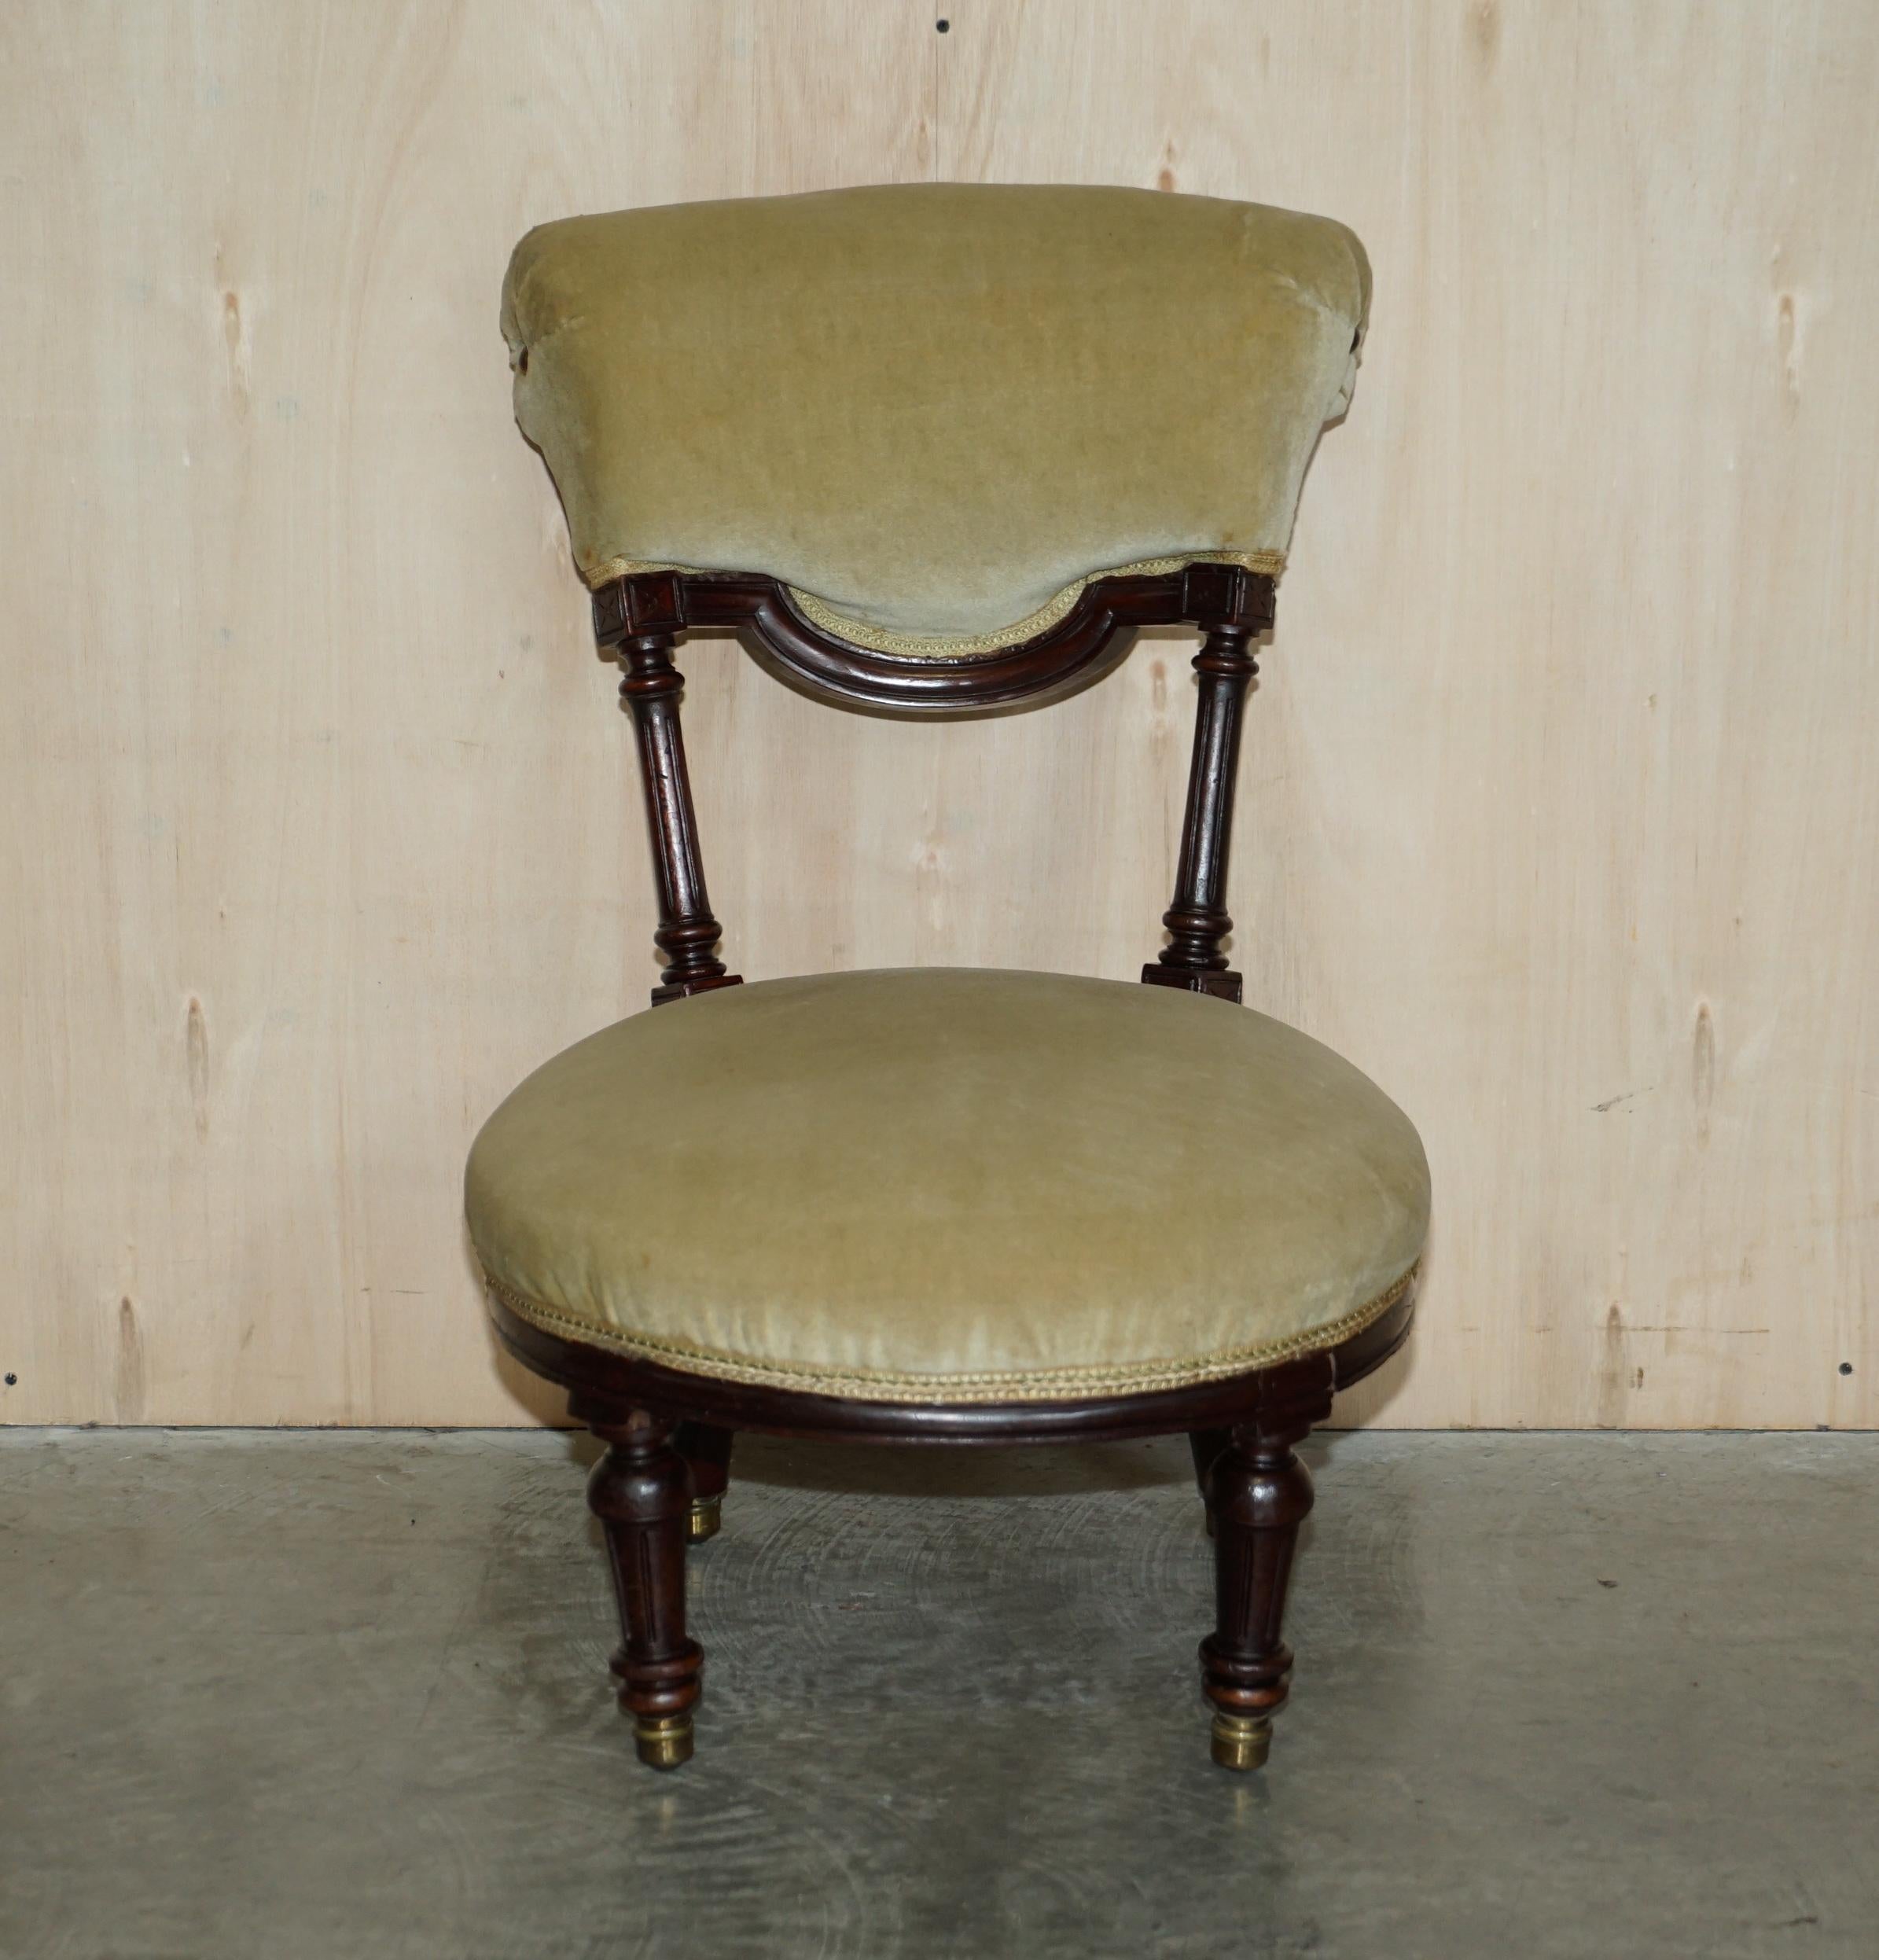 We are delighted to offer for sale this very nice Victorian circa 1860 mahogany framed nursing chair with velour upholstery.

A nicely made genuine Victorian antique, it is as mentioned a nursing chair which were specially designed to be low to